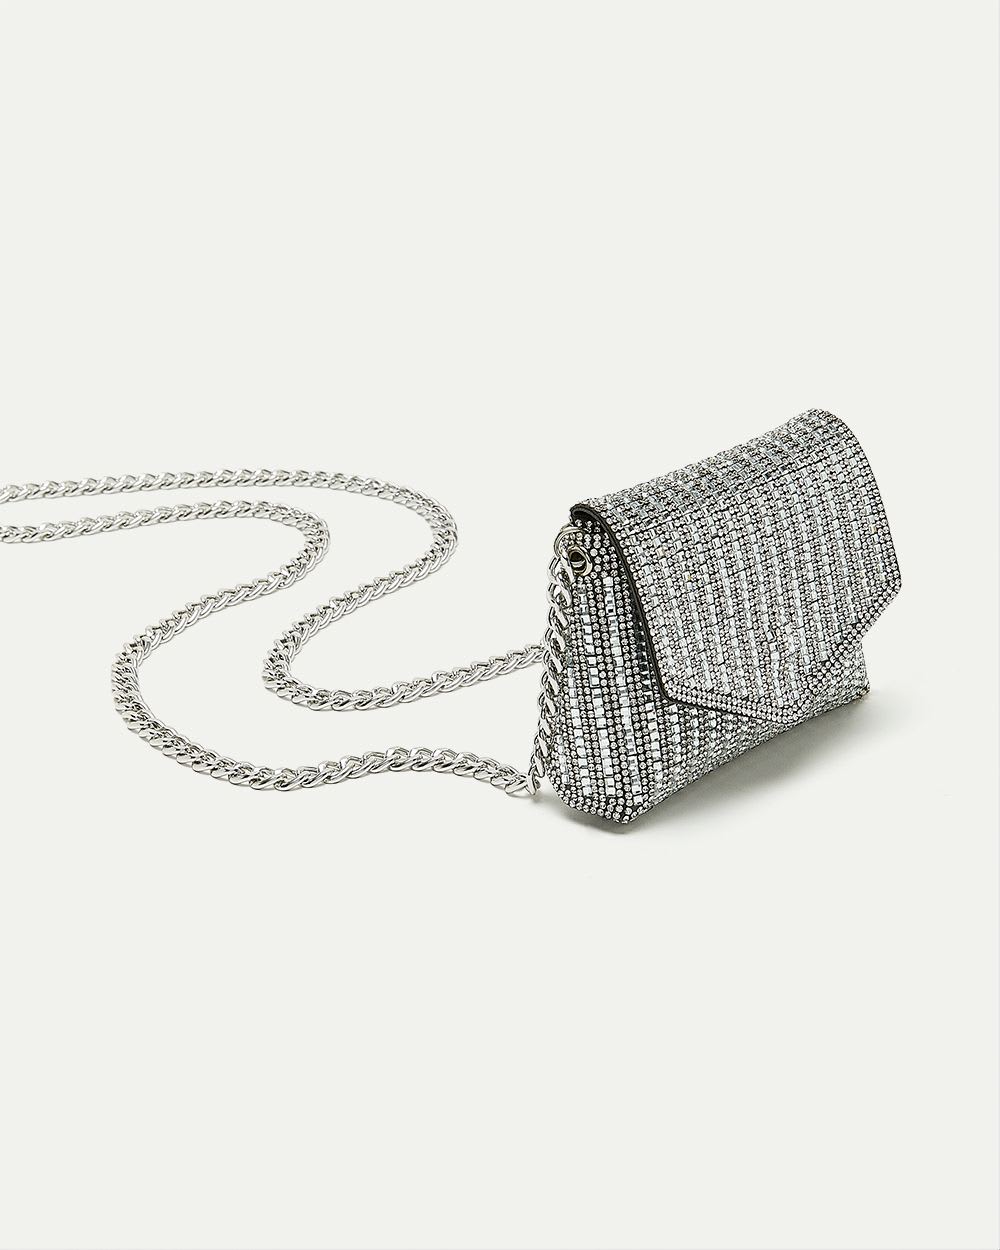 Small Cross-Body Bag with Glittery Chain | Reitmans